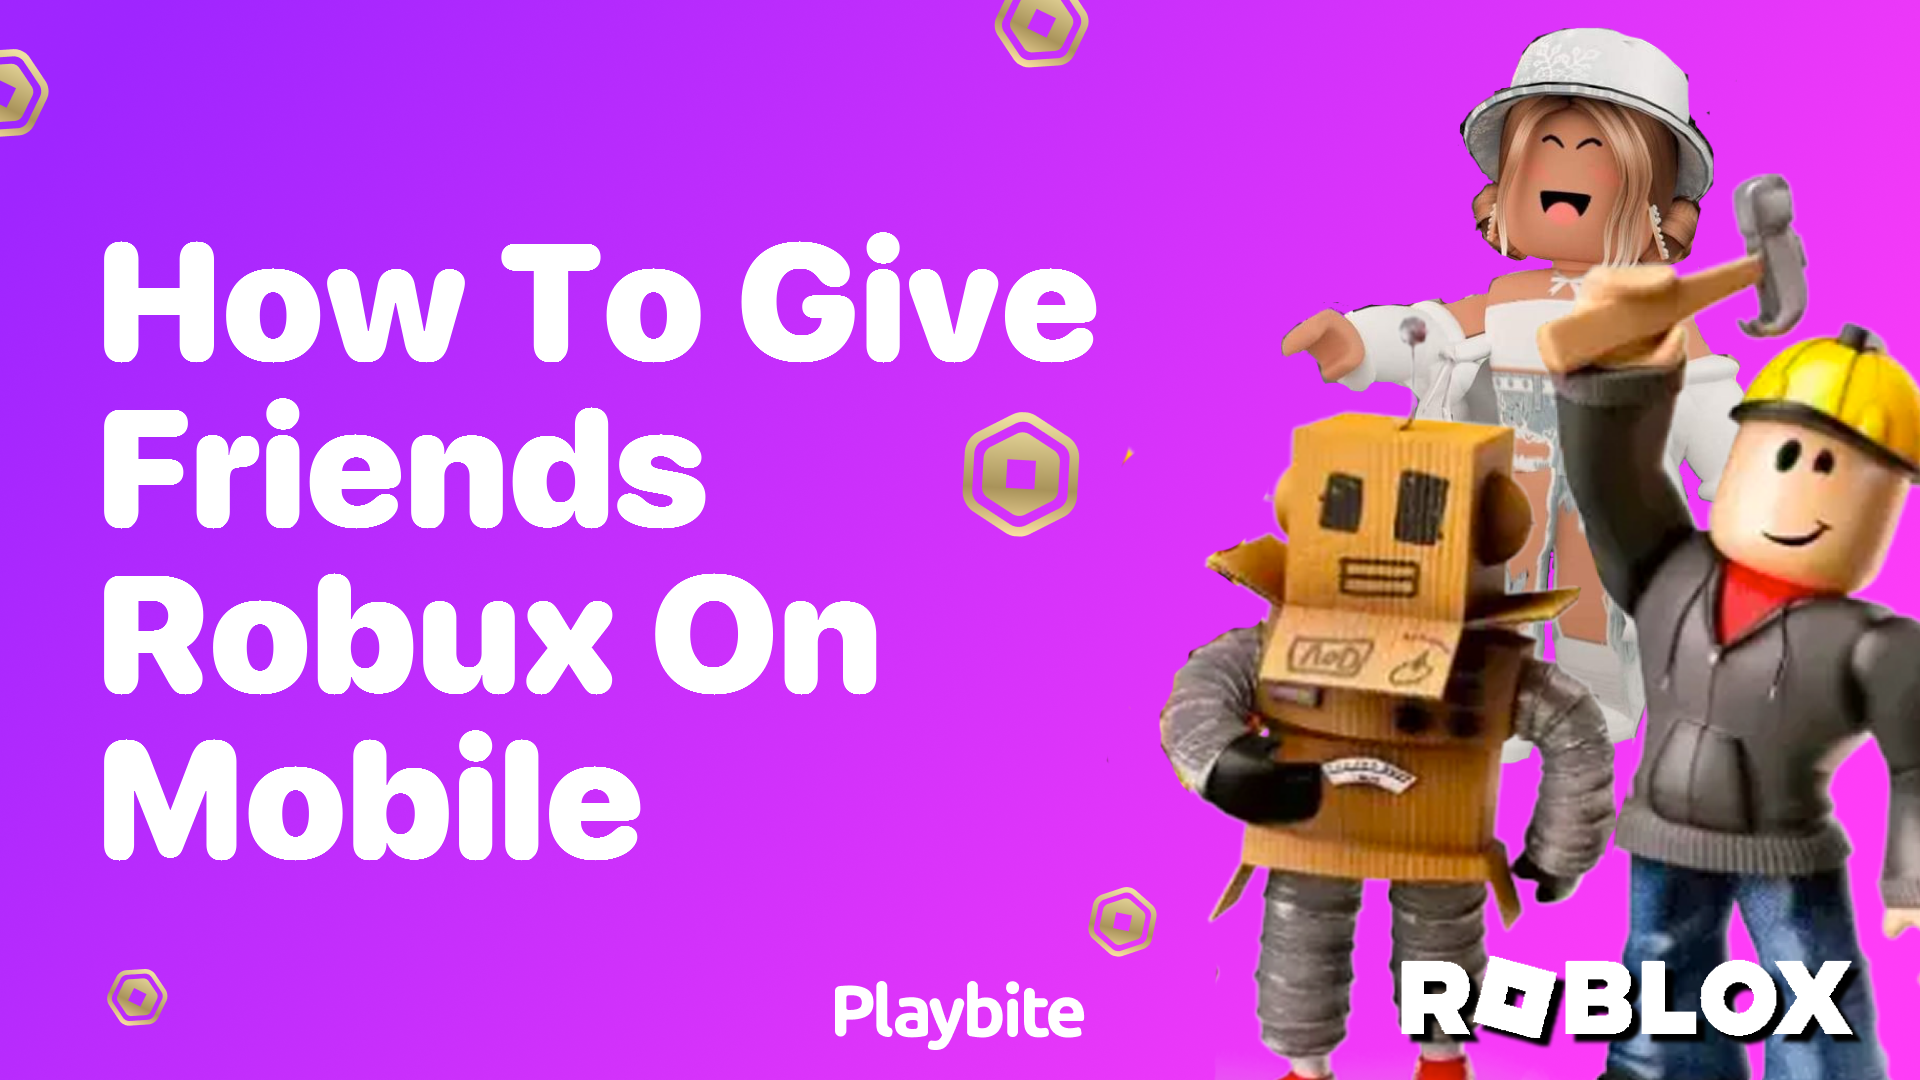 How to Give Friends Robux on Mobile: A Quick Guide